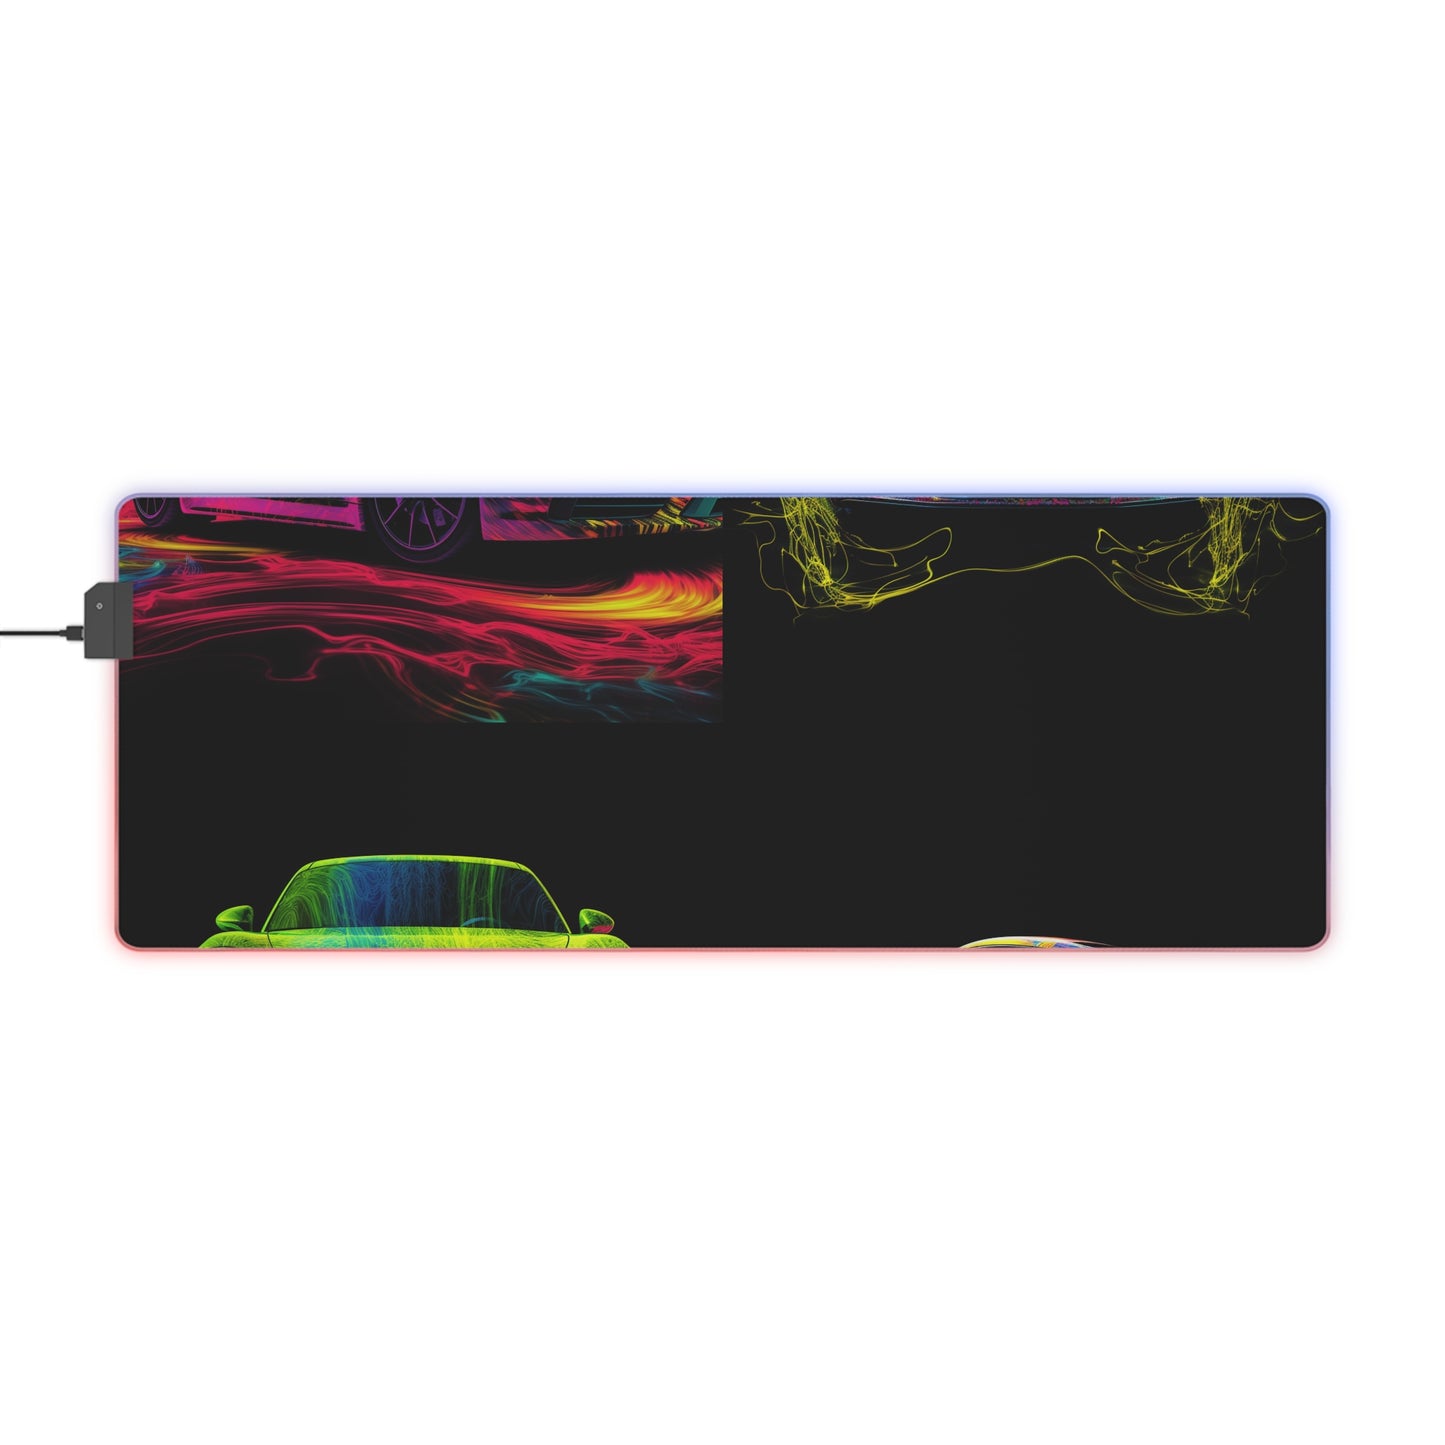 LED Gaming Mouse Pad Porsche Flair 5